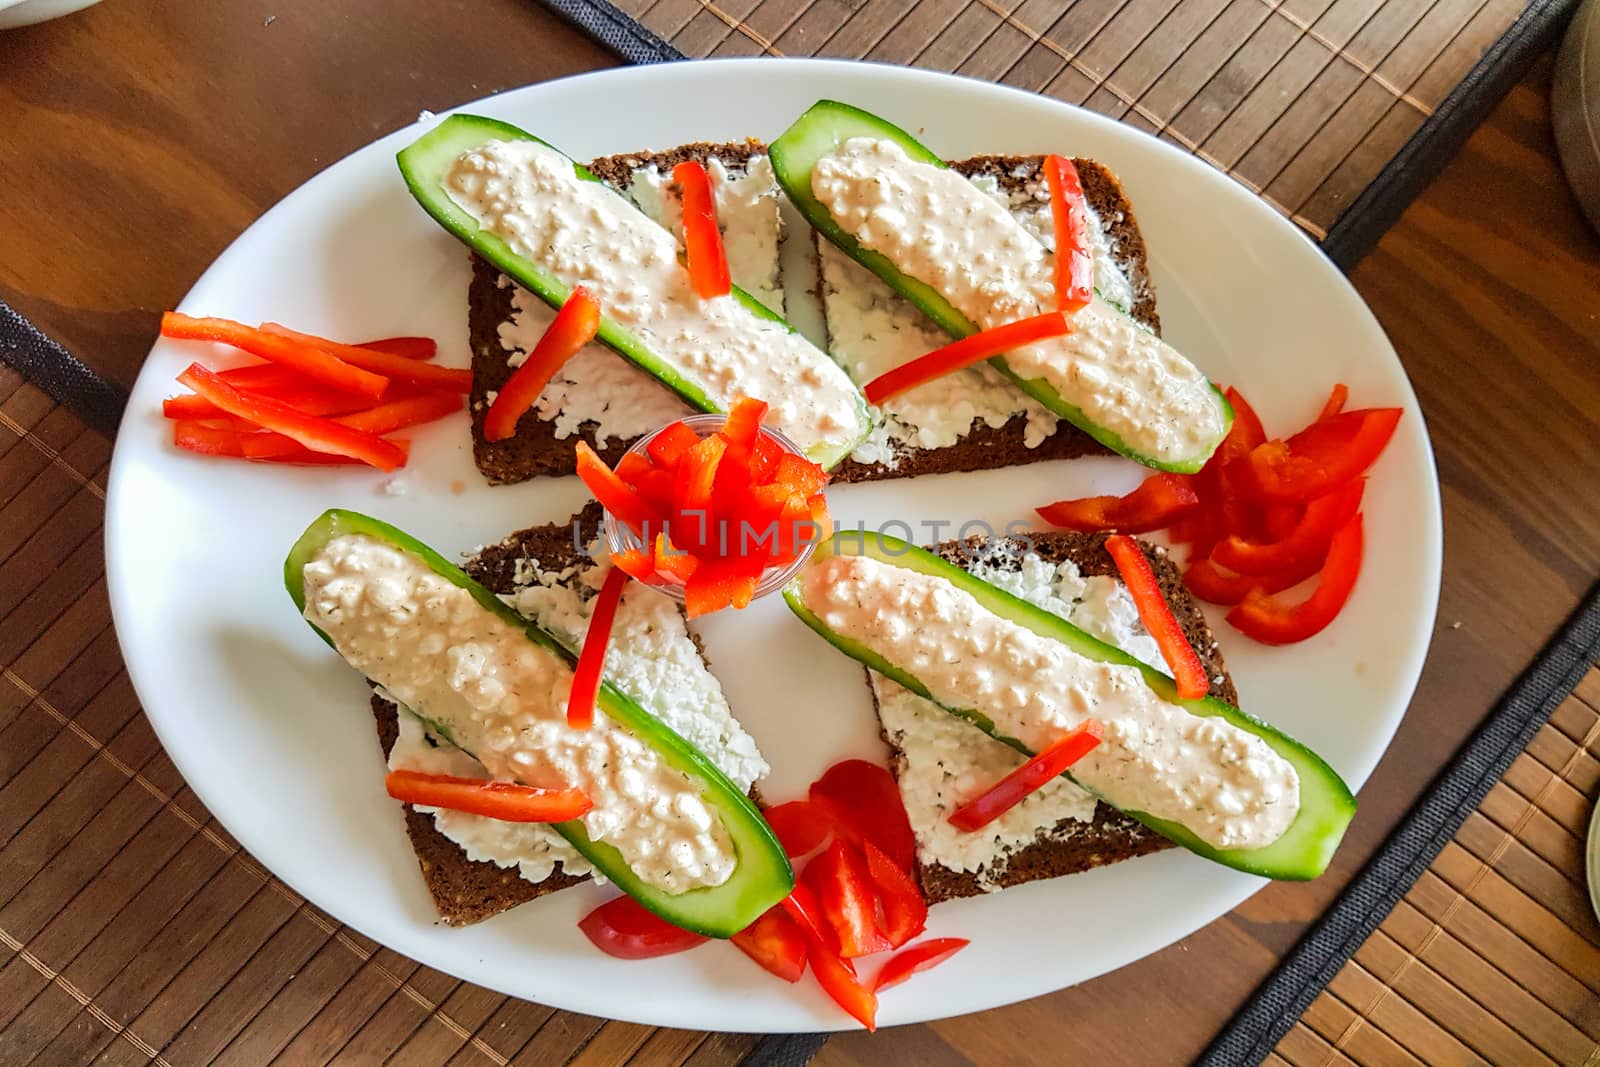 Cucumber boat with fresh quark, pepper strips on black bread     by JFsPic